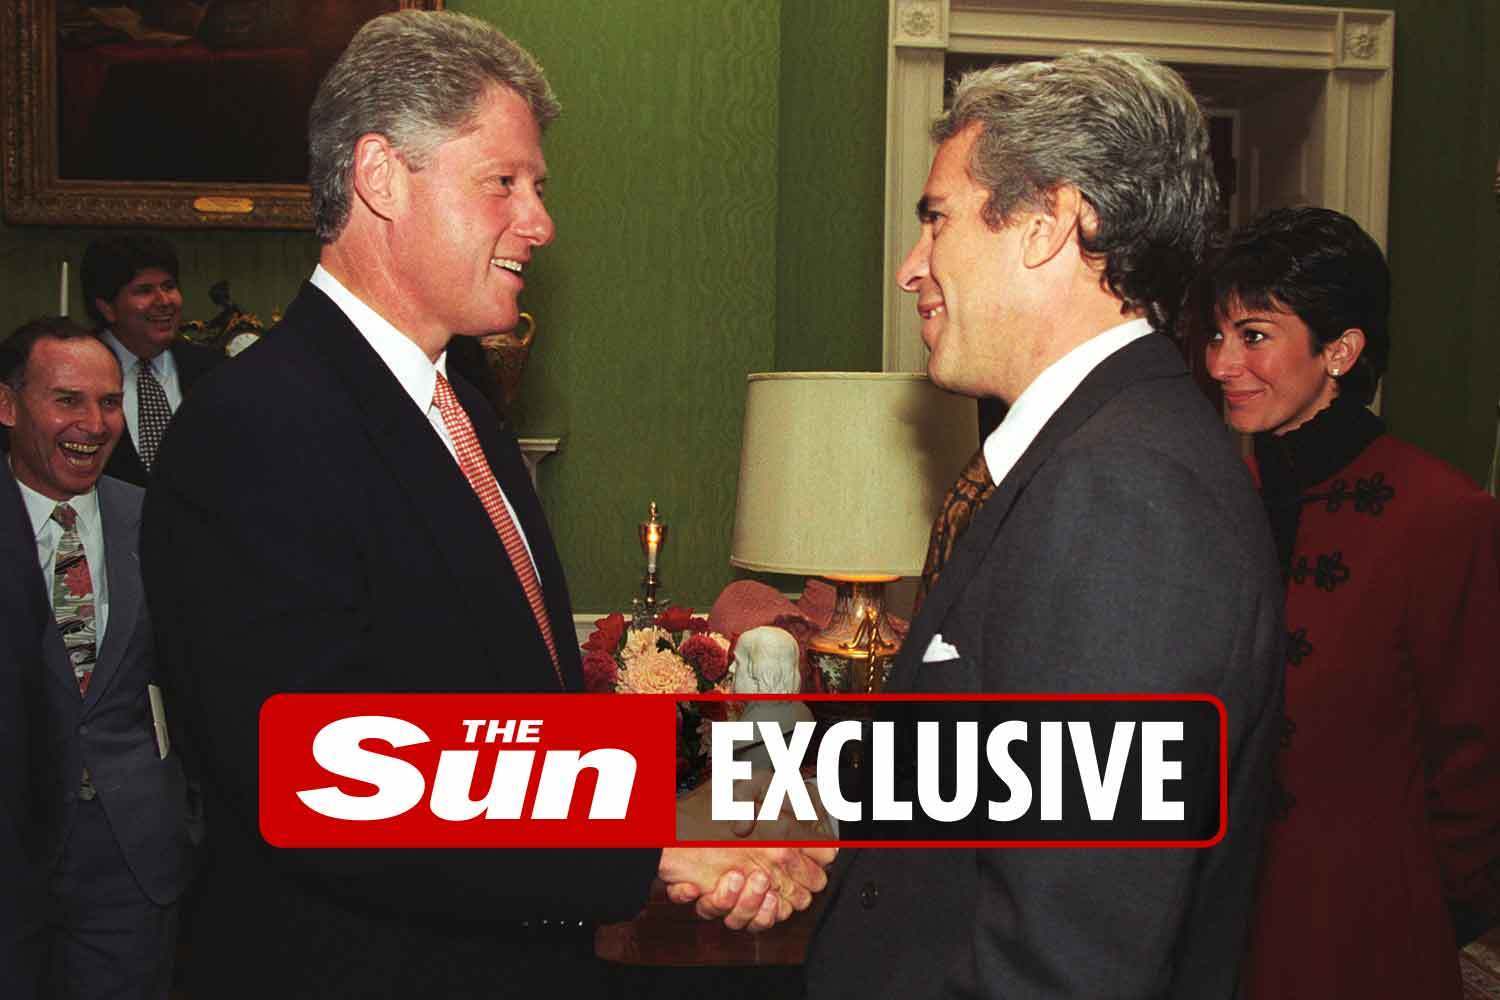 Maxwell, Epstein &amp; Clinton smile together in never-before-seen images